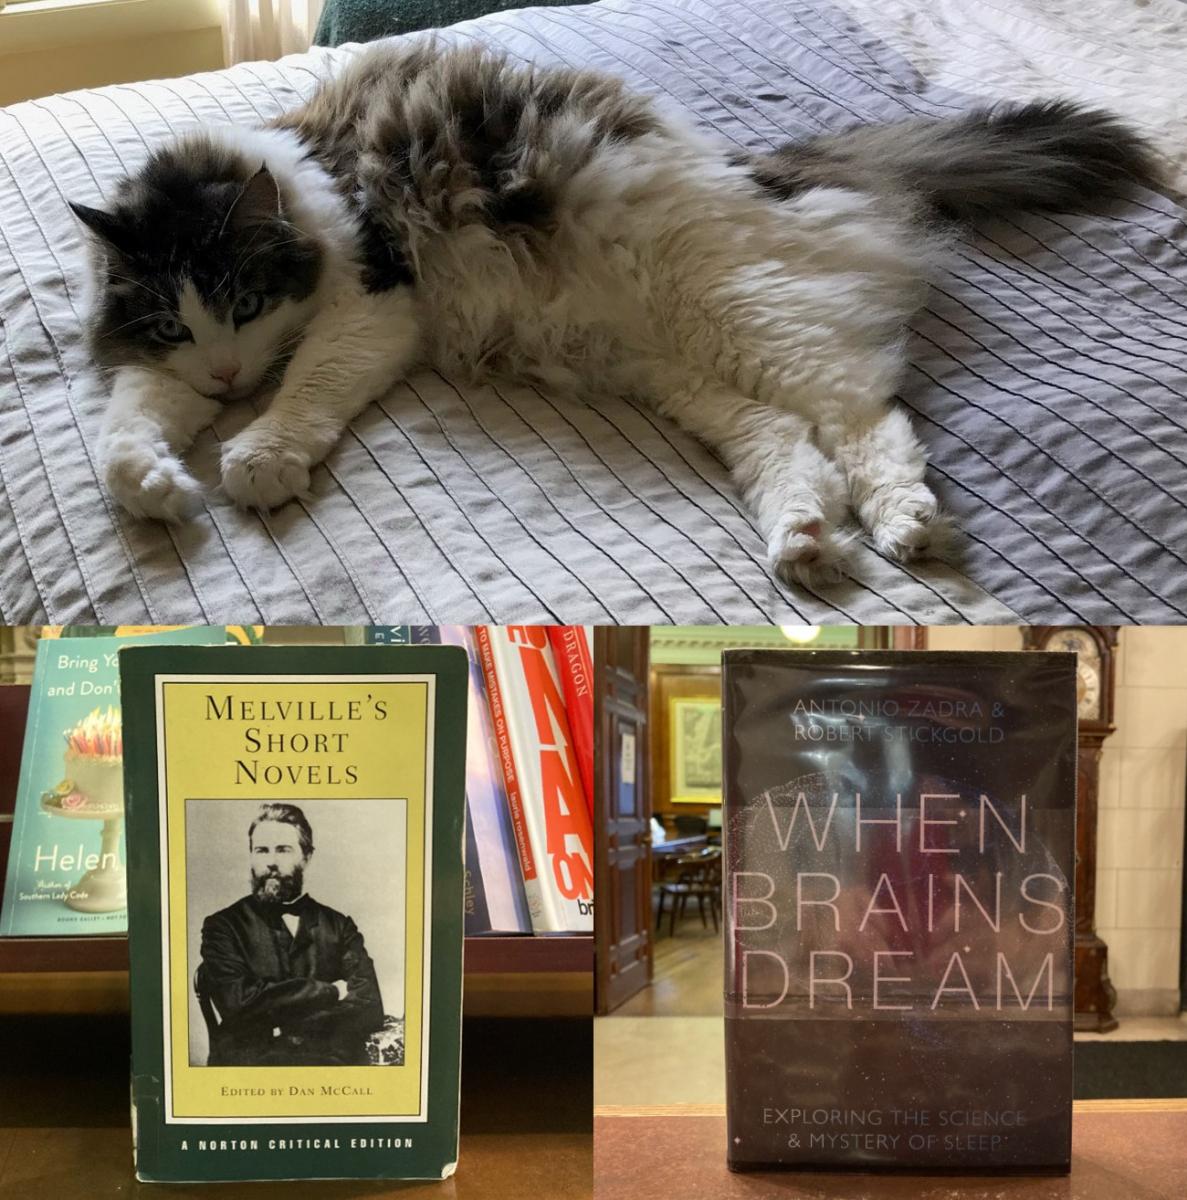 Gus with Melville's Short Novels and When Brains Dream